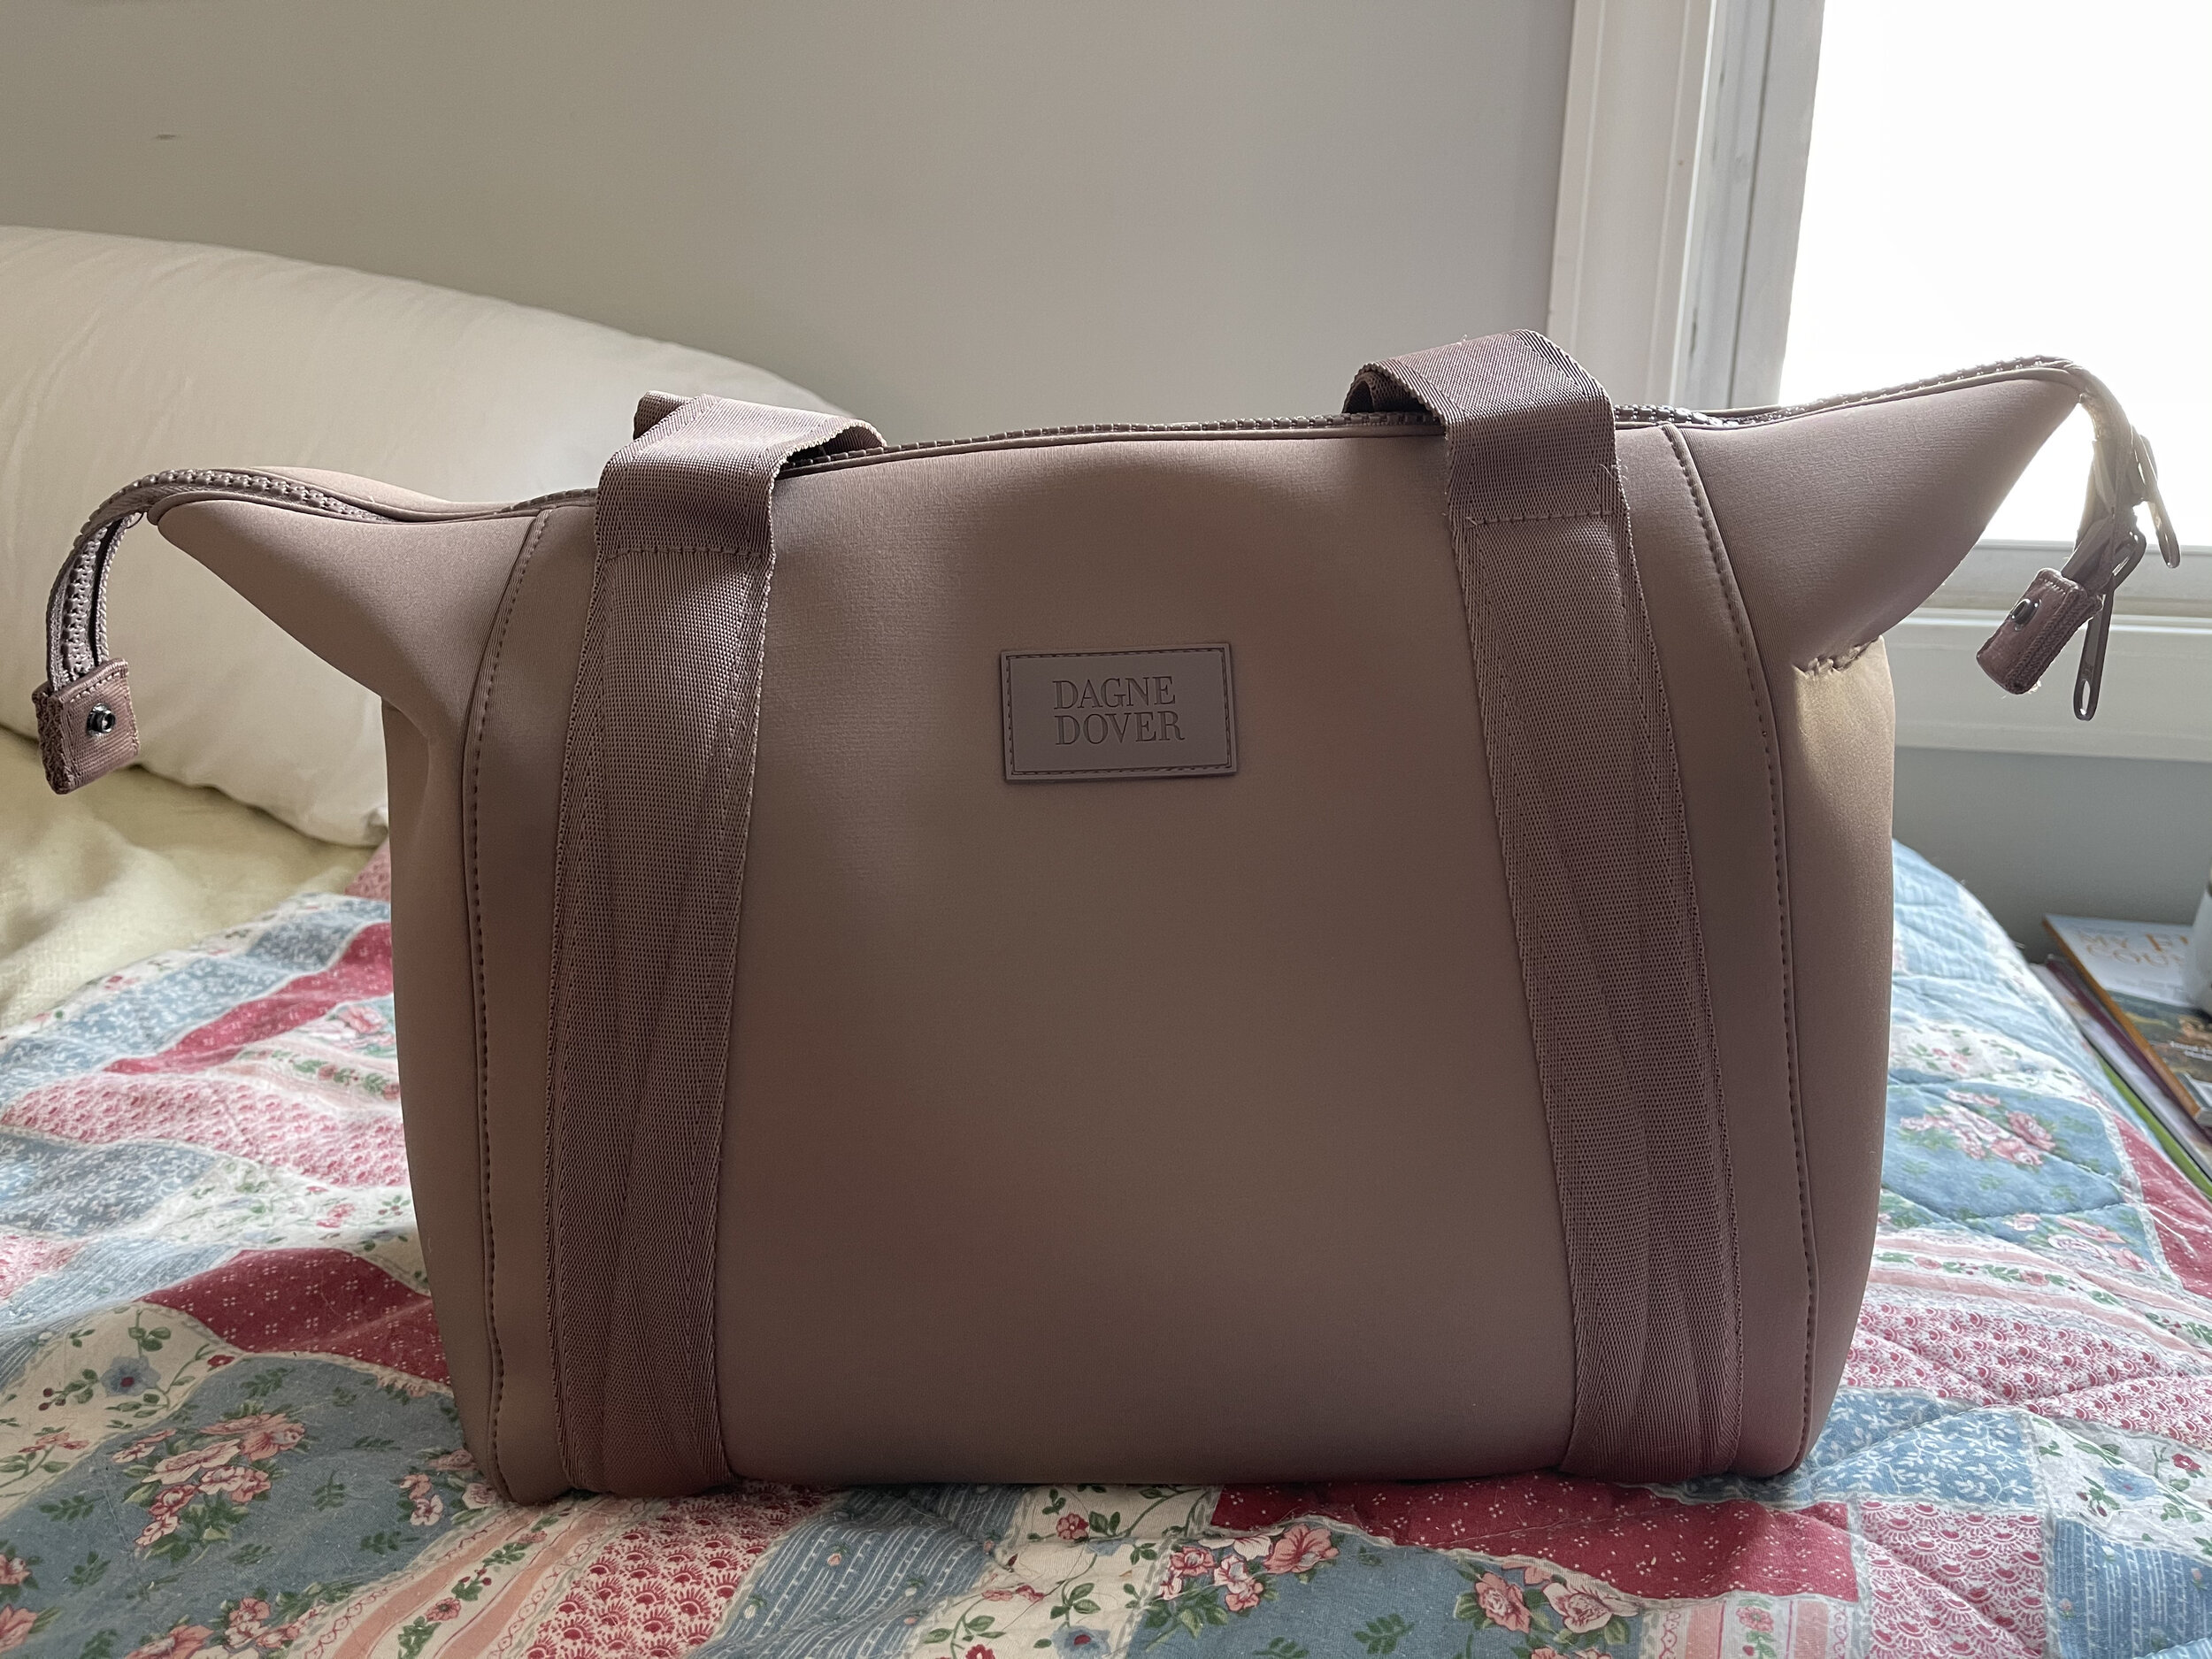 How To Clean Dagne Dover Bag  